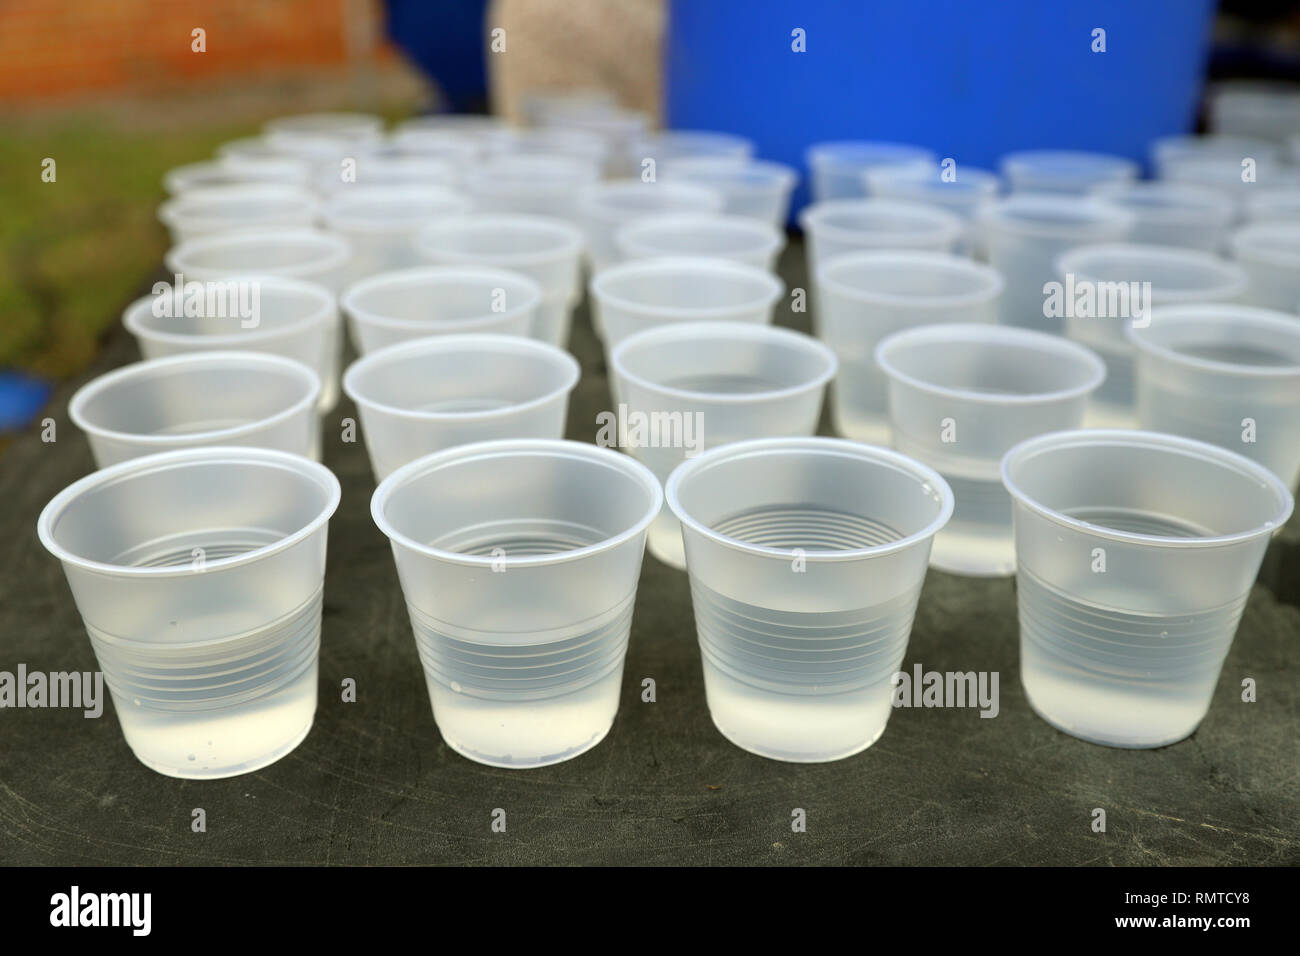 https://c8.alamy.com/comp/RMTCY8/disposeable-plastic-water-cups-on-table-for-drinking-at-a-road-race-plastic-recycling-RMTCY8.jpg